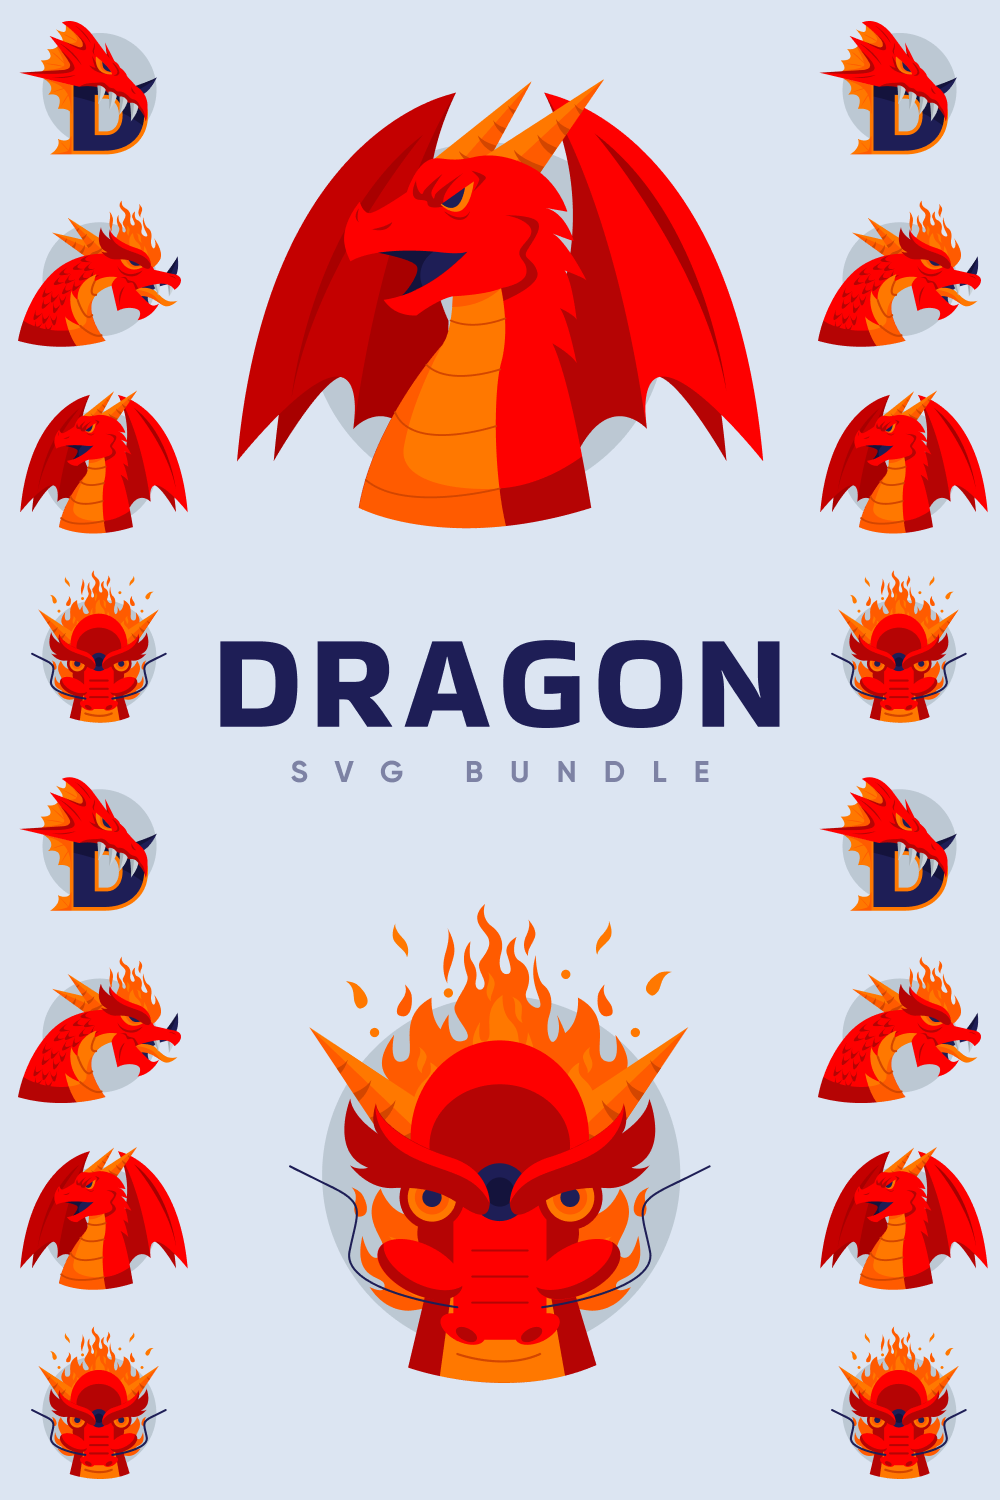 Red dragon surrounded by other red dragon heads.